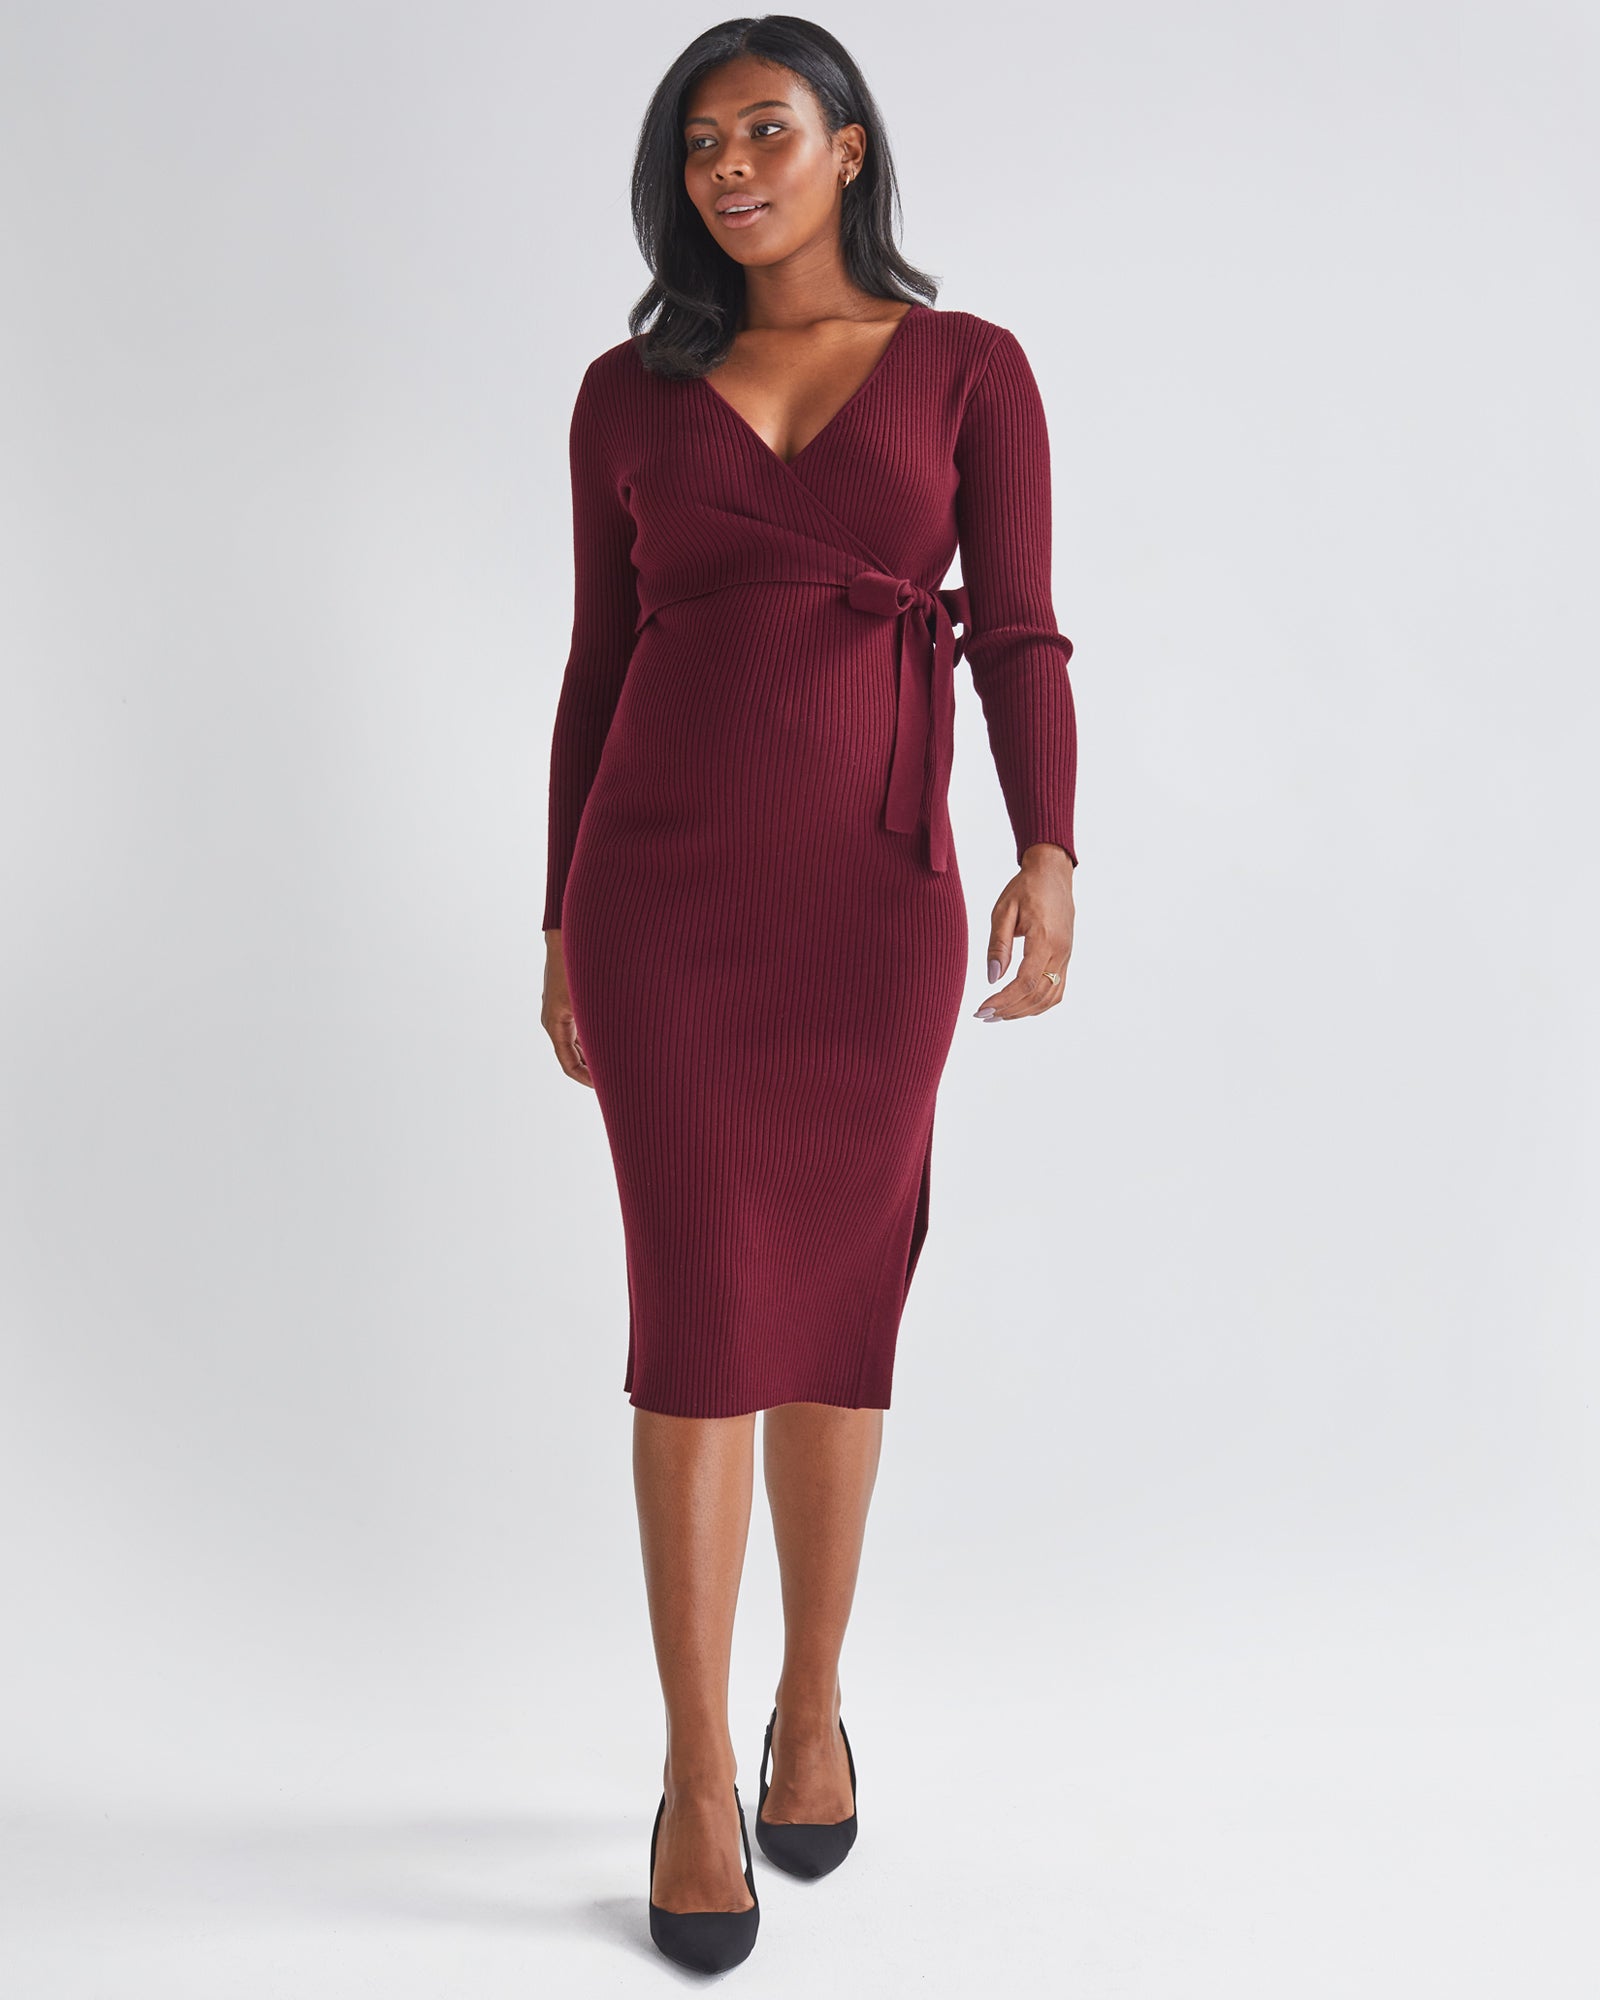 A Pregnannt Woman Wearing Lucille Full Sleeve Knit Maternity Midi Dress in Burgundy  from Angel Maternity.